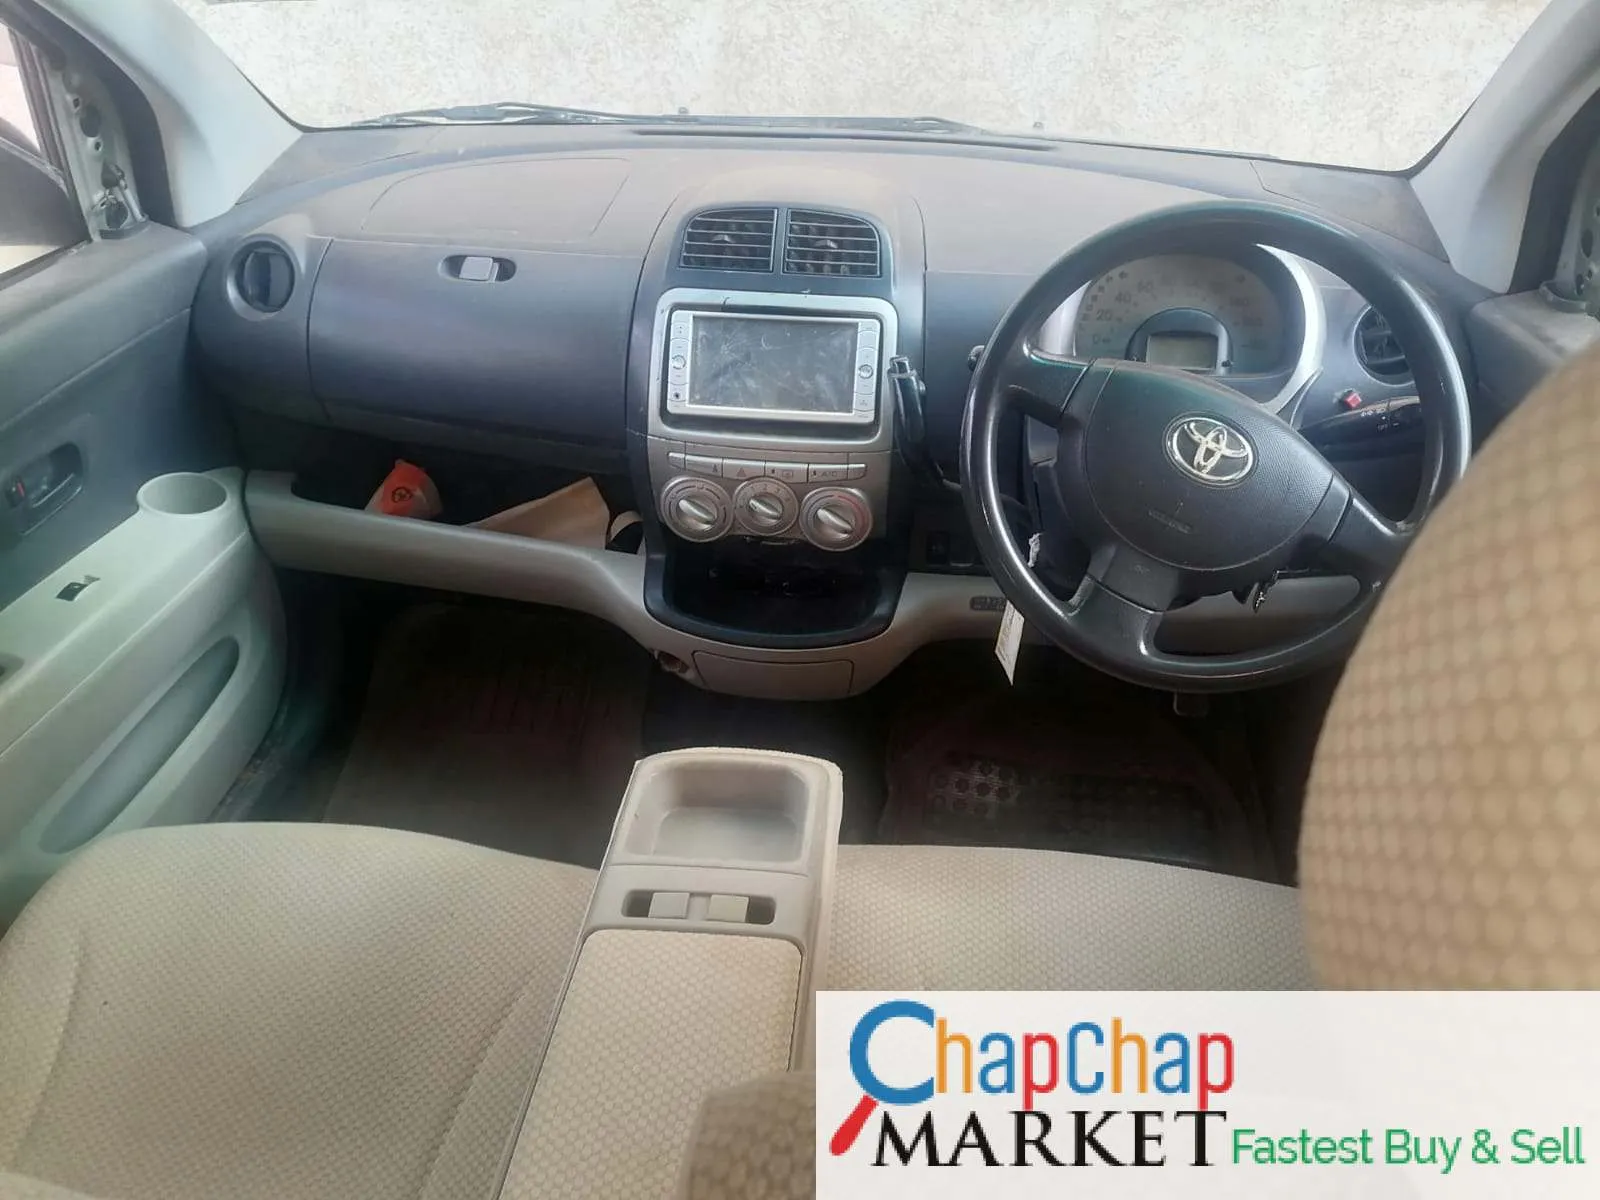 Toyota PASSO KCK 340K ONLY You Pay 20% Deposit Trade in OK Wow